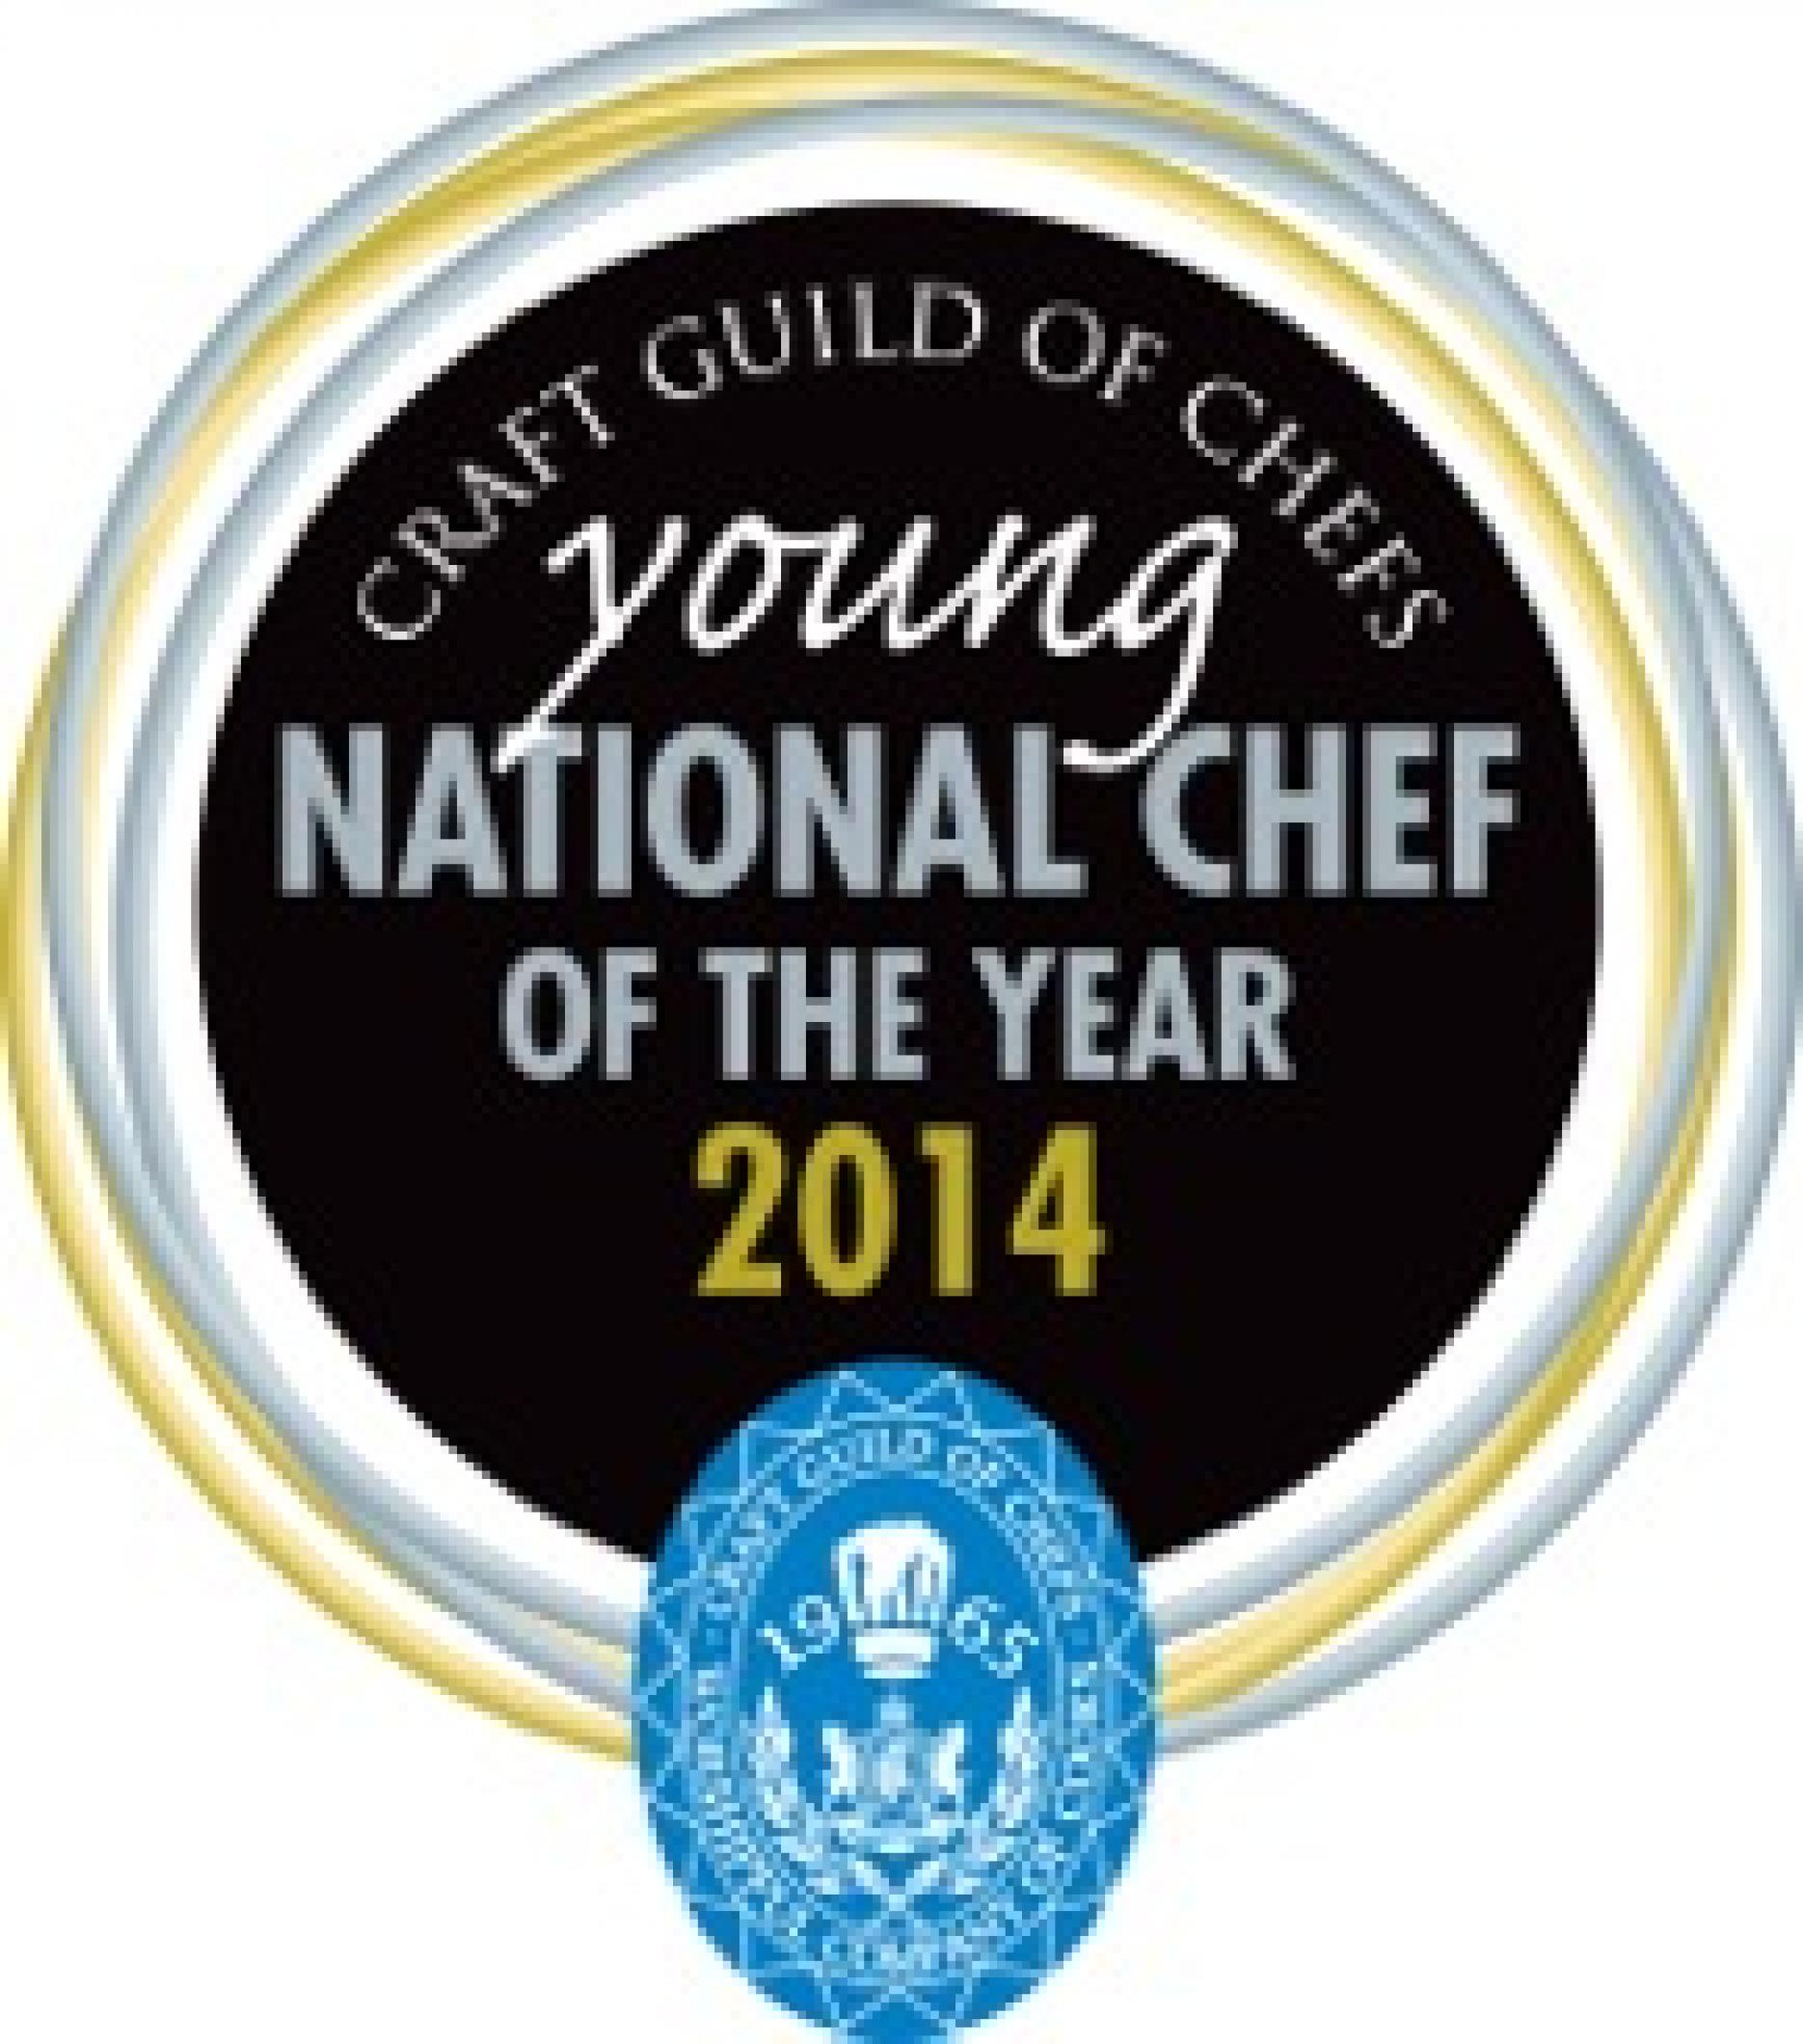 Image of Young National Chef of the Year logo